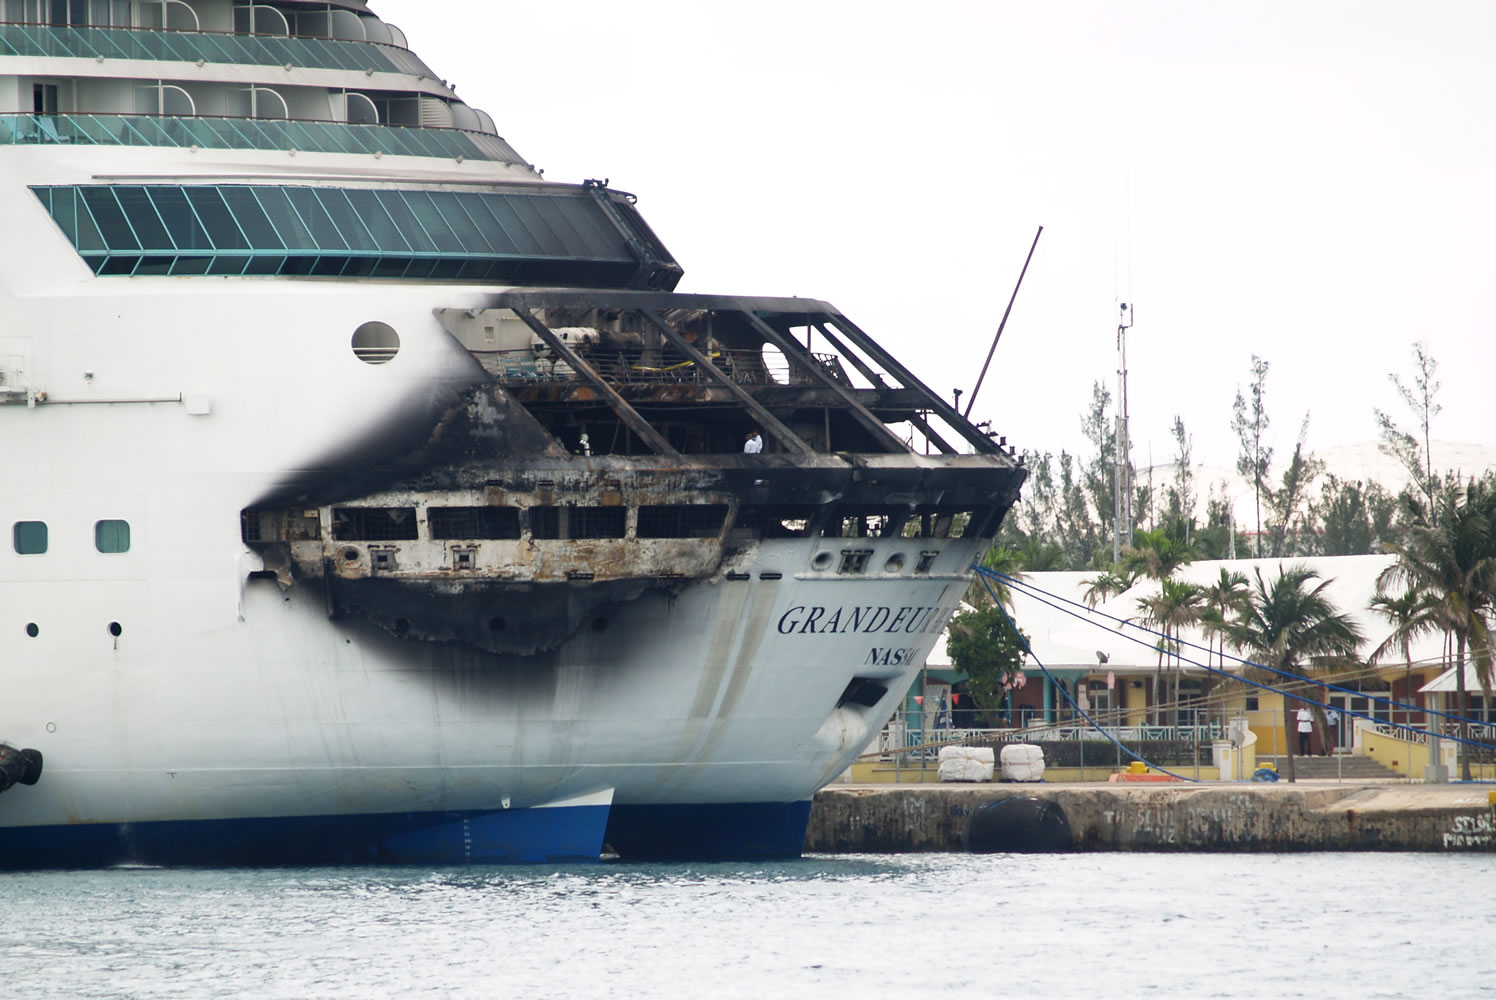 Passengers back in U.S. after cruise ship fire The Columbian